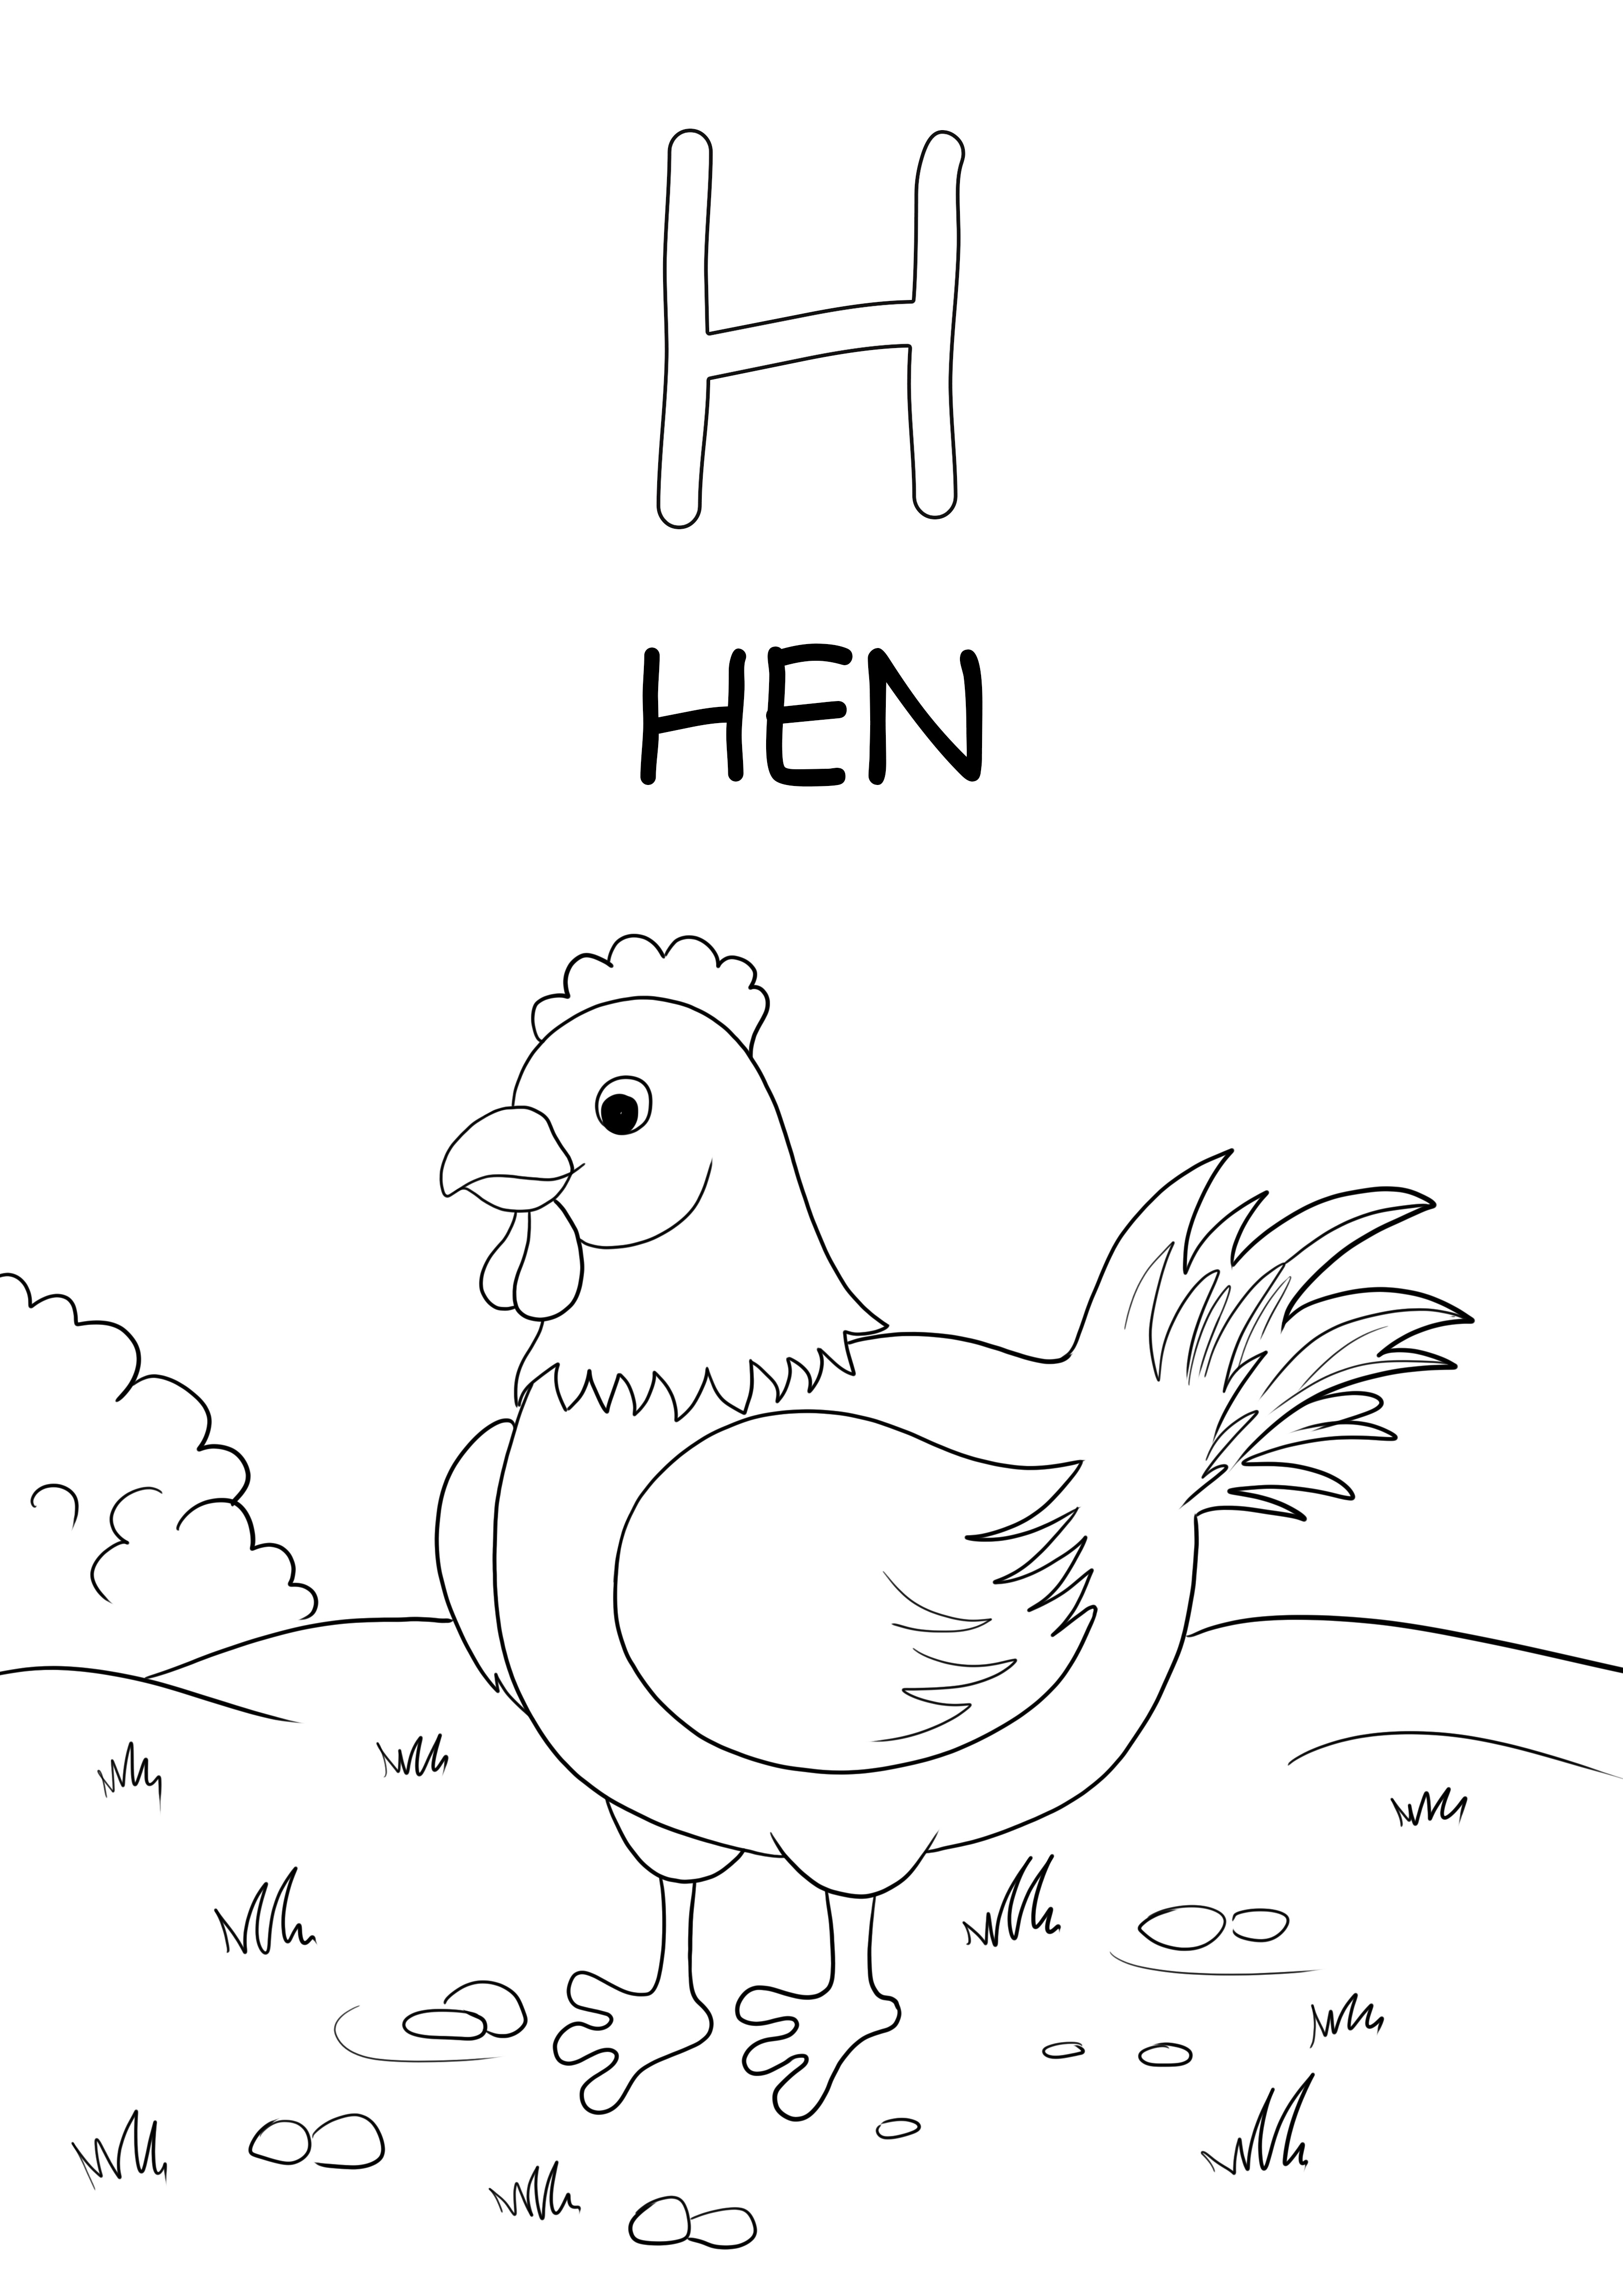 H is for HEN coloring sheet for free downloading